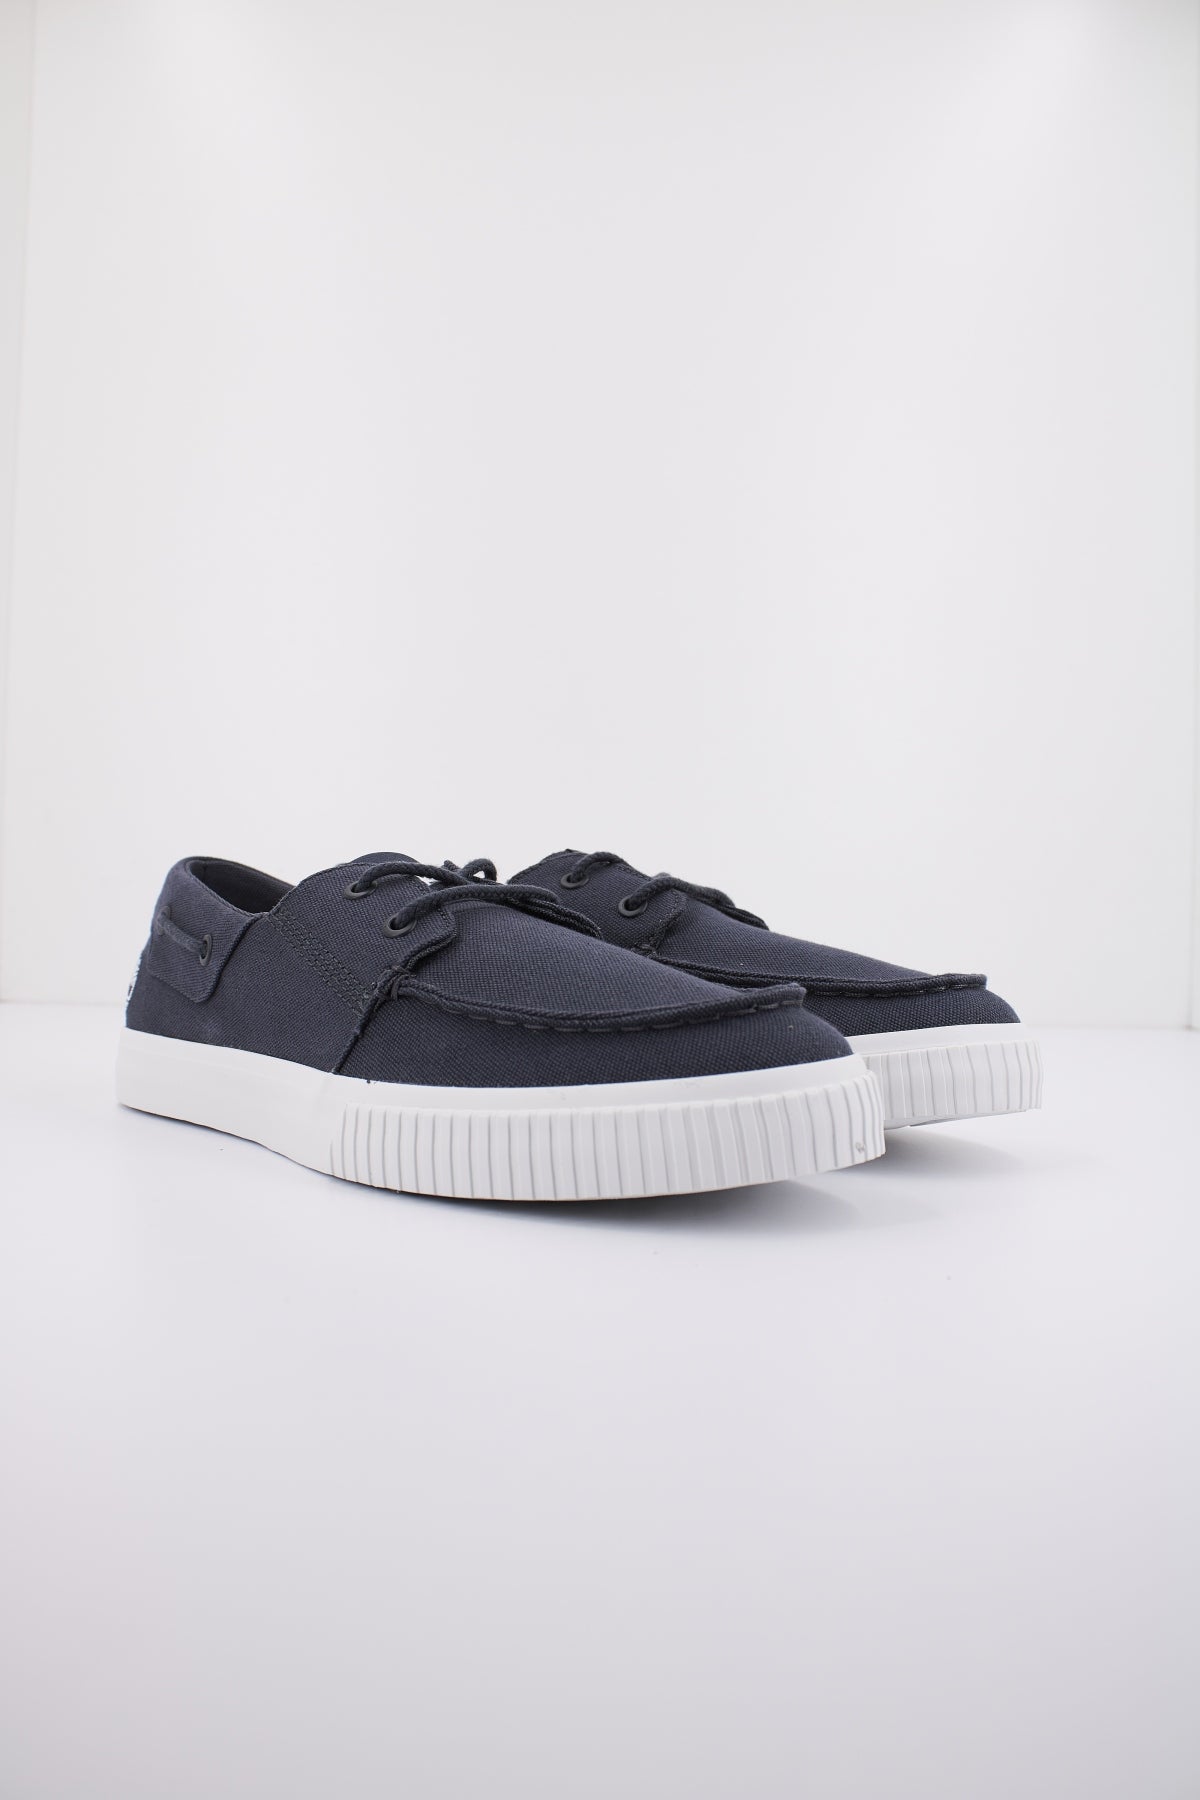 TIMBERLAND MYLO LOW LACE UP en color AZUL  (2)